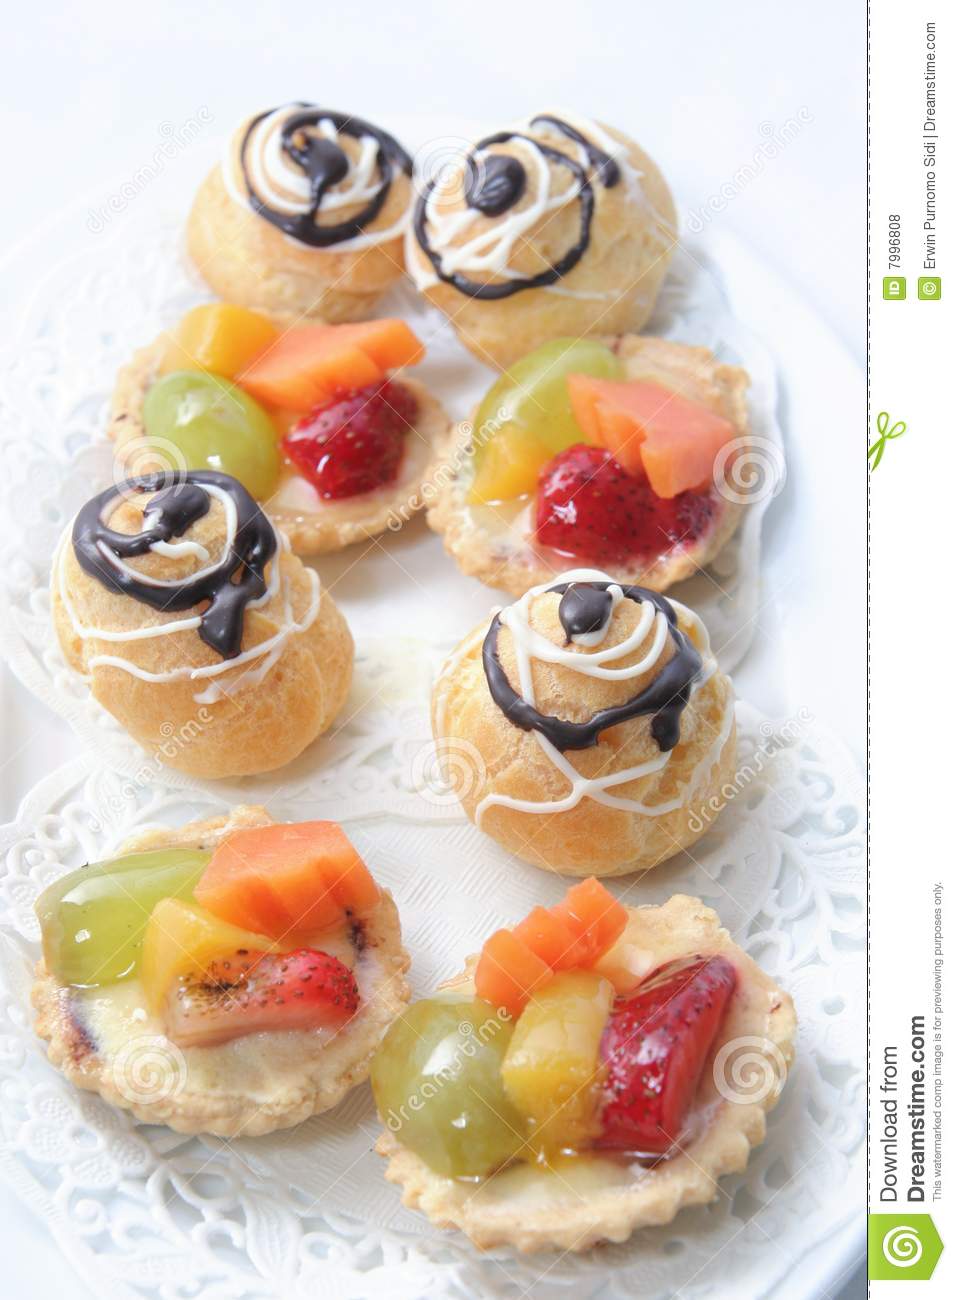 French Pastry Royalty Free Stock Photos   Image  7996808